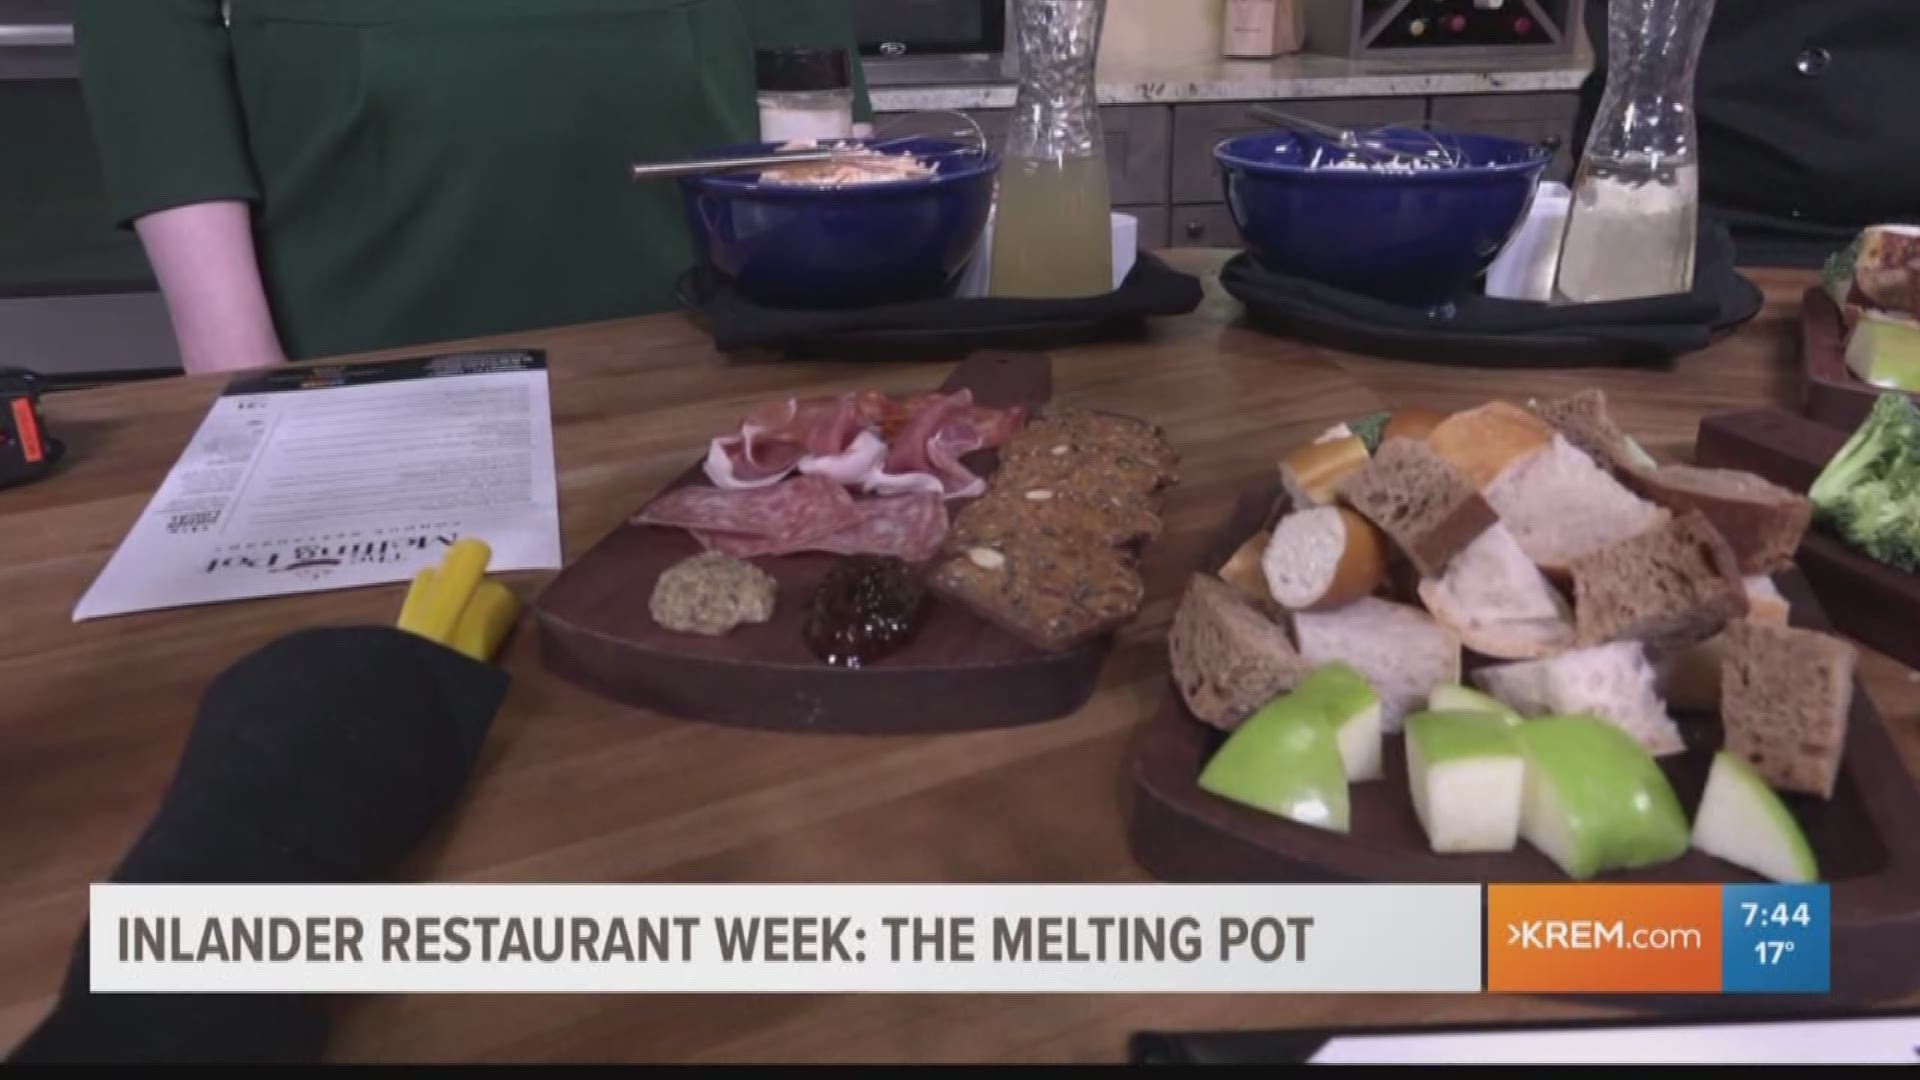 Chelsea from The Melting Pot stopped by to share the spread for Restaurant Week with KREM's Brittany Bailey and Evan Noorani.